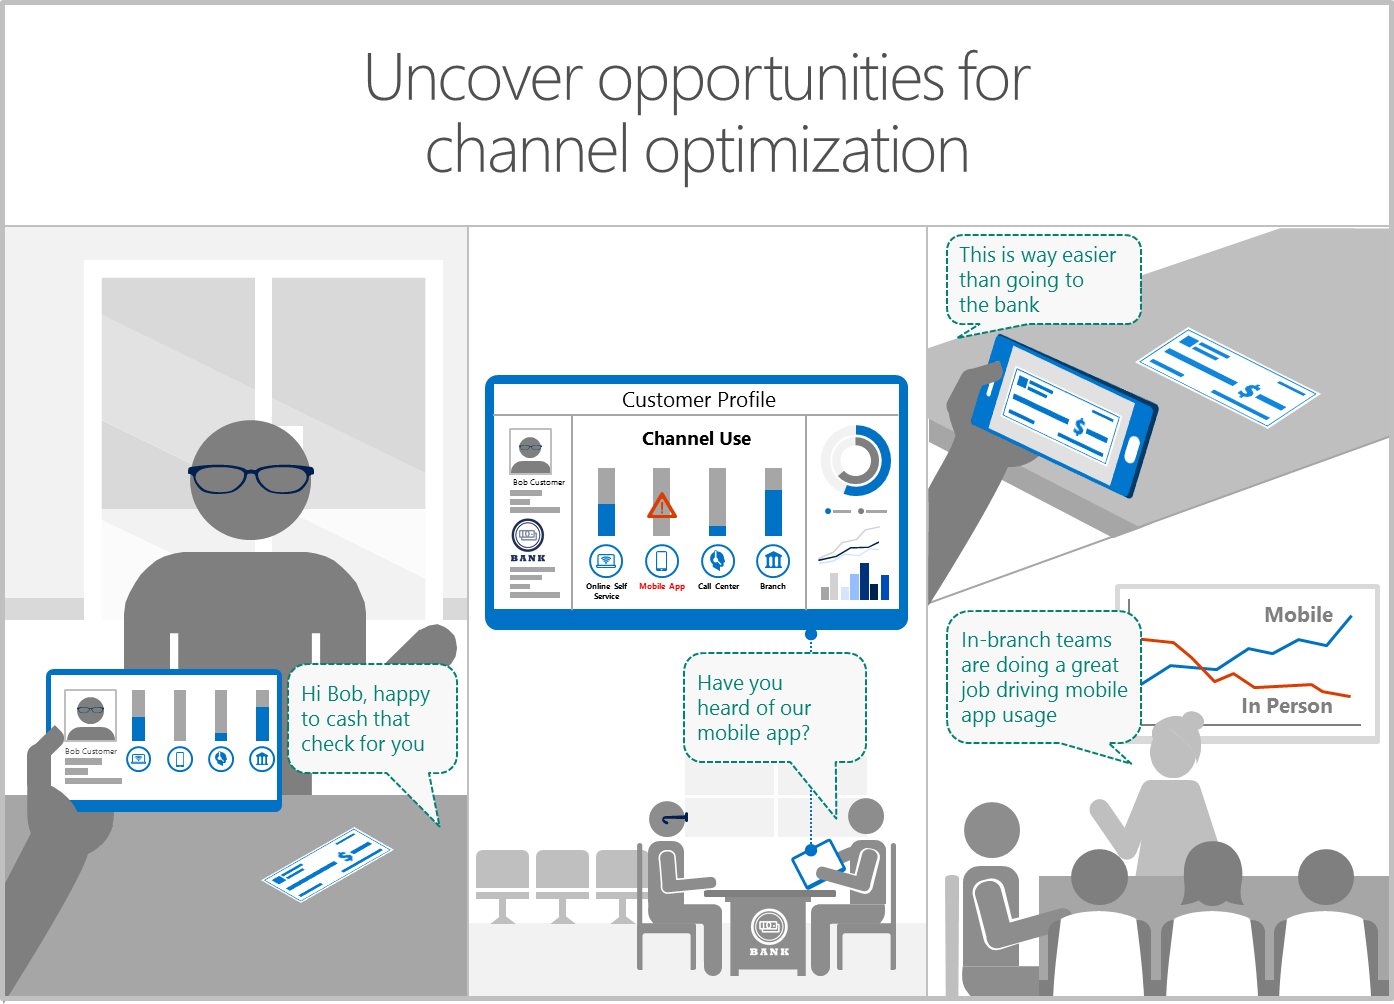 Uncover opportunities for channel optimization Infographic